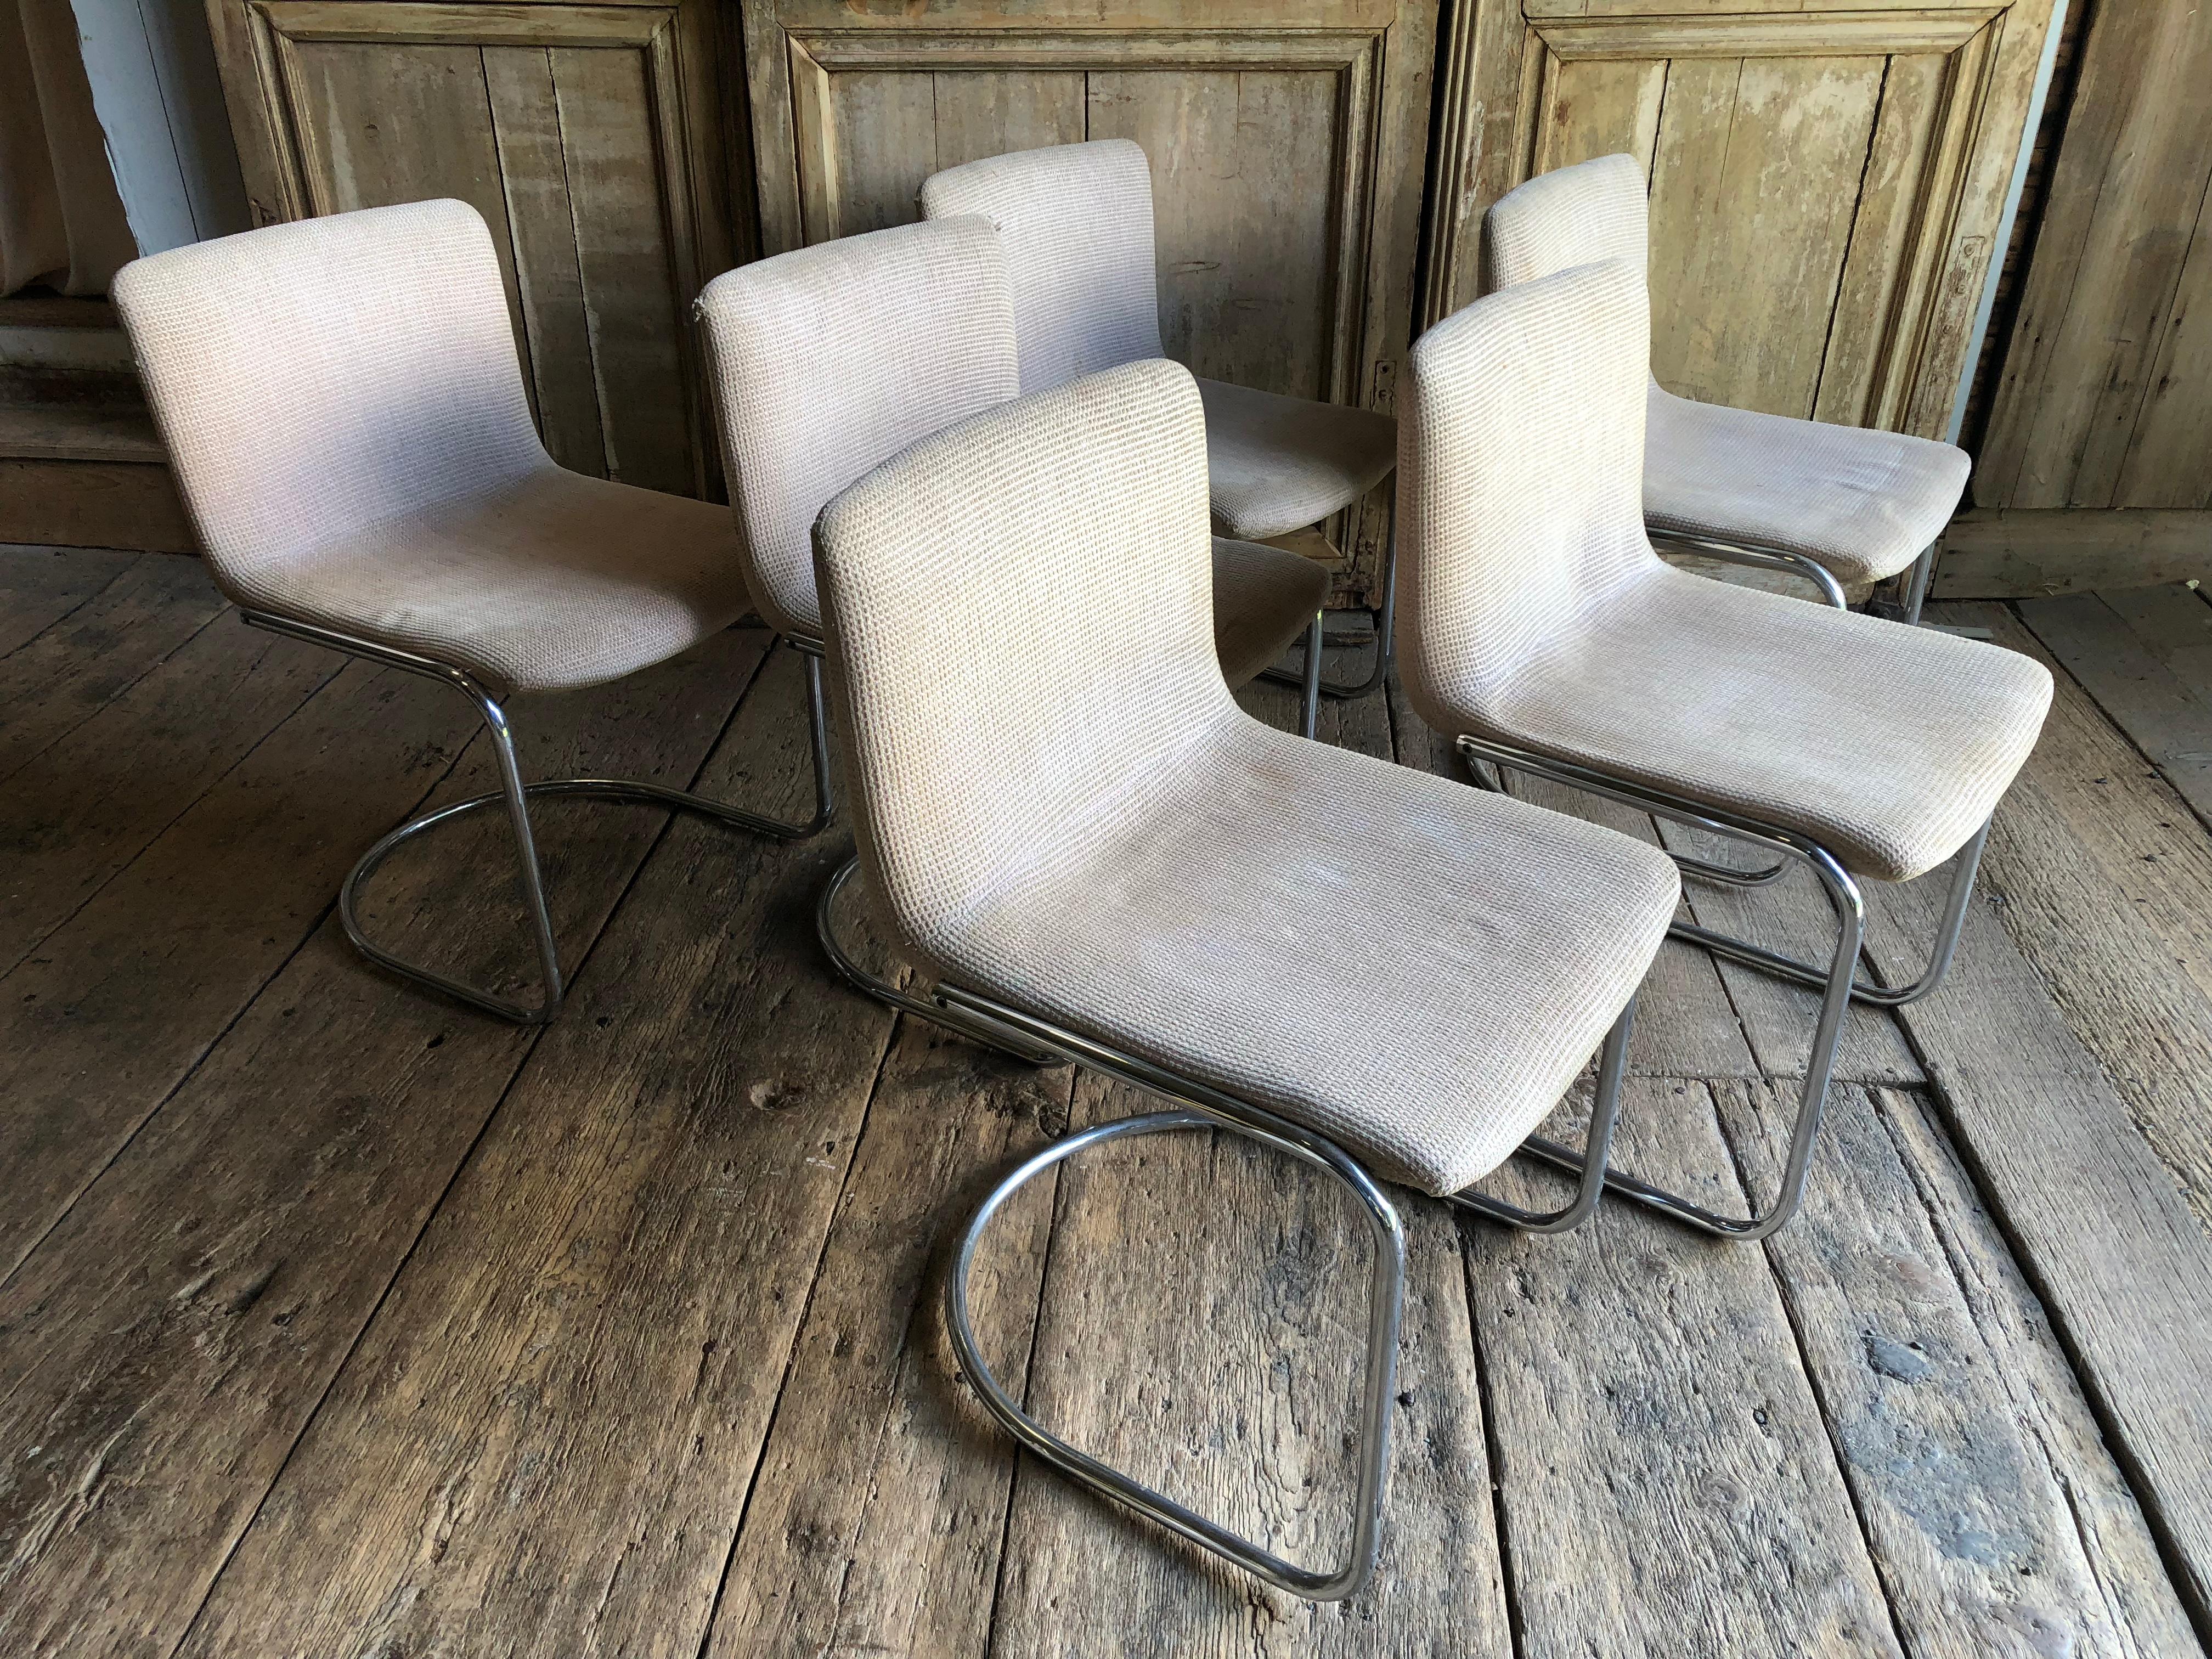 A set of 6 chromed tubular steel “Lens” dining chairs by Giovanni Offredi for Saporiti, Italia, circa 1960s, with upholstered seat and back. Signed on bottom Saporiti Italia.